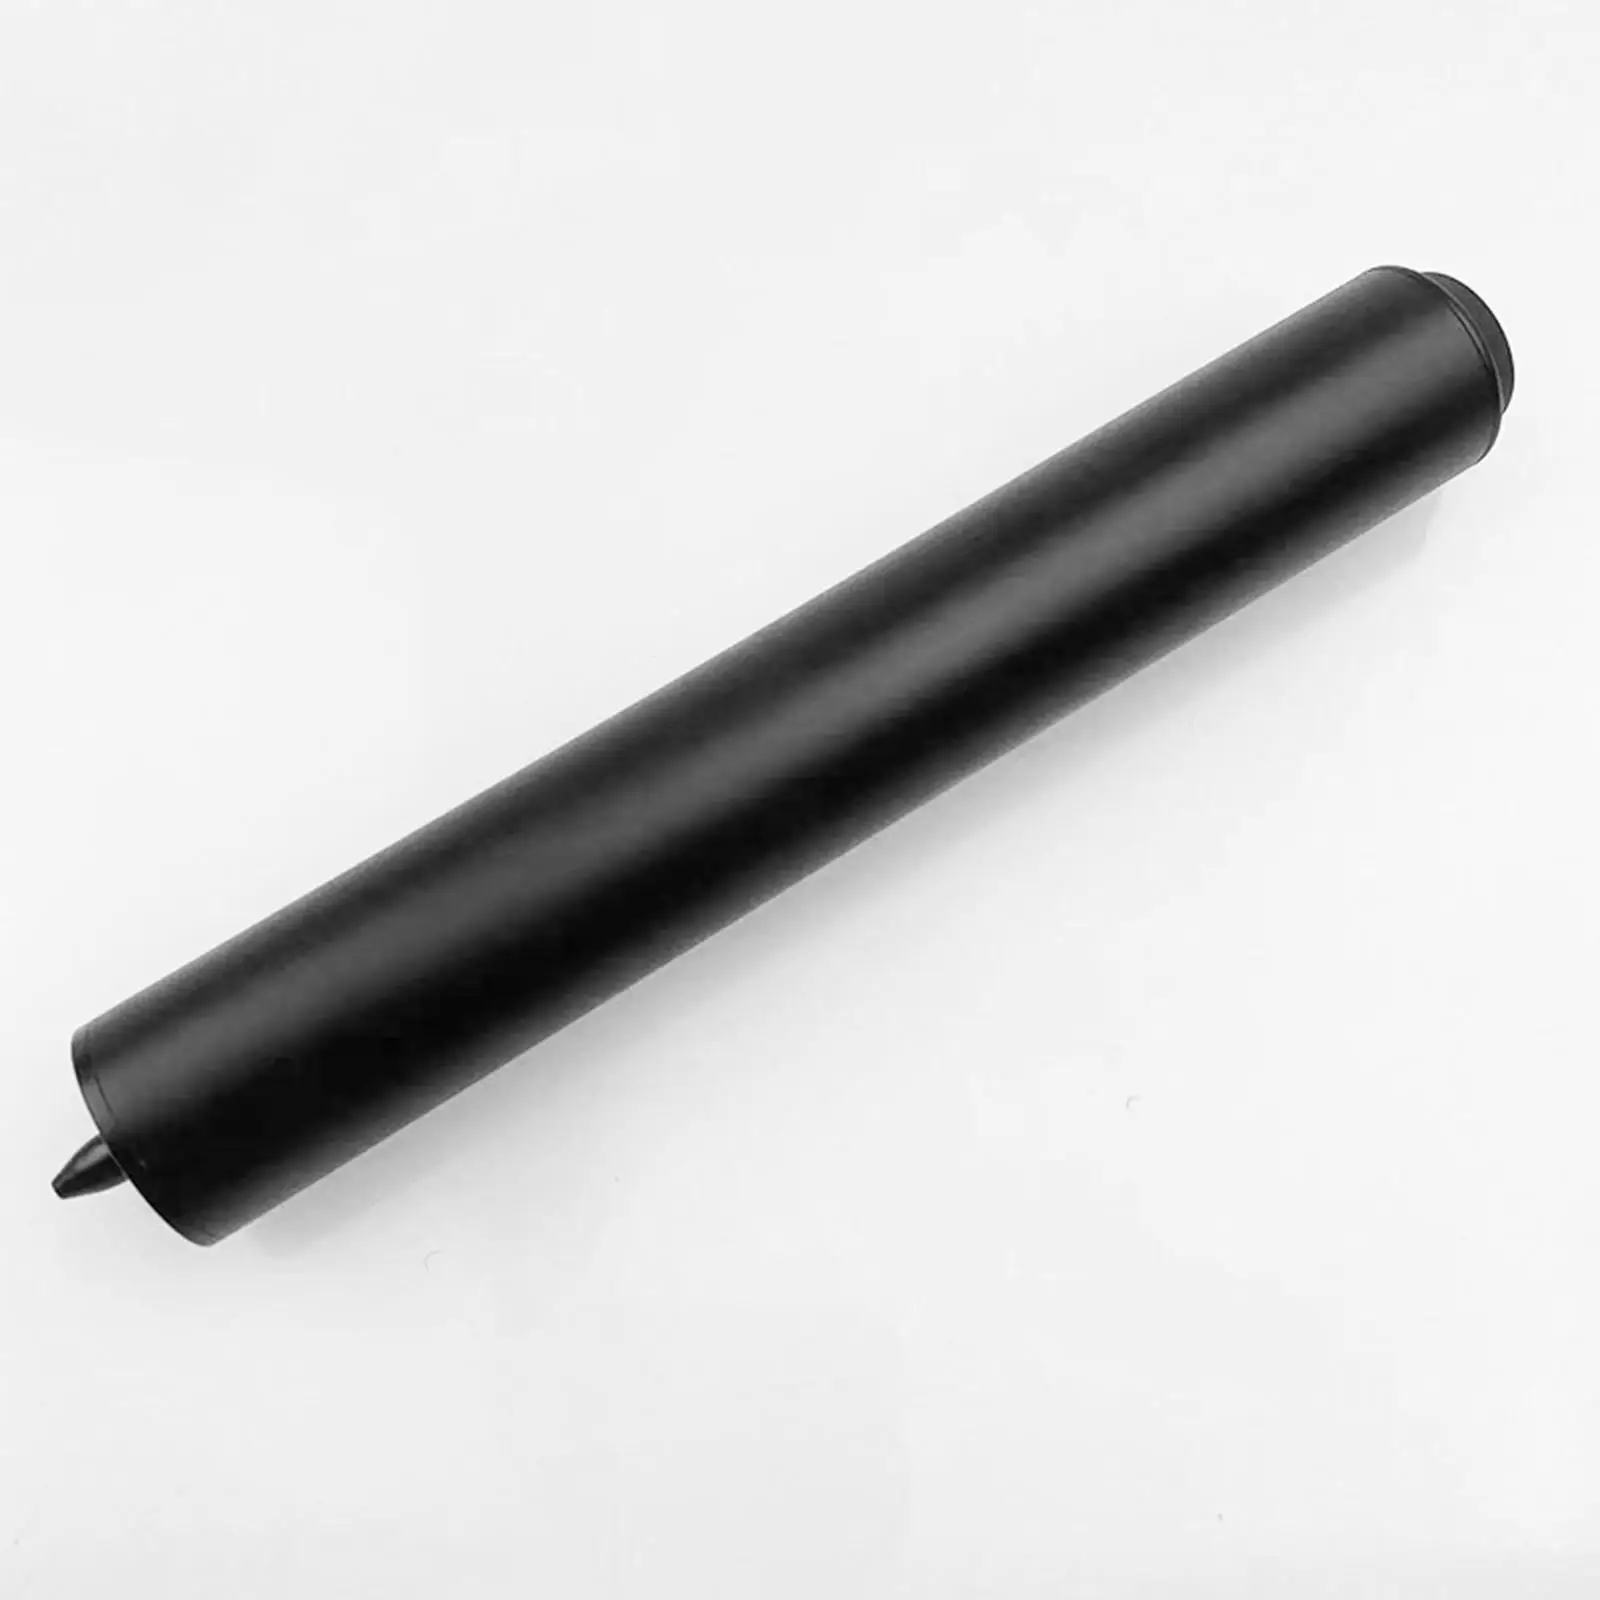 Pool Cue Extender Compact Billiards Pool Cue Extension Snooker Cue Extension for Snooker Enthusiast Athlete Beginners Accessory